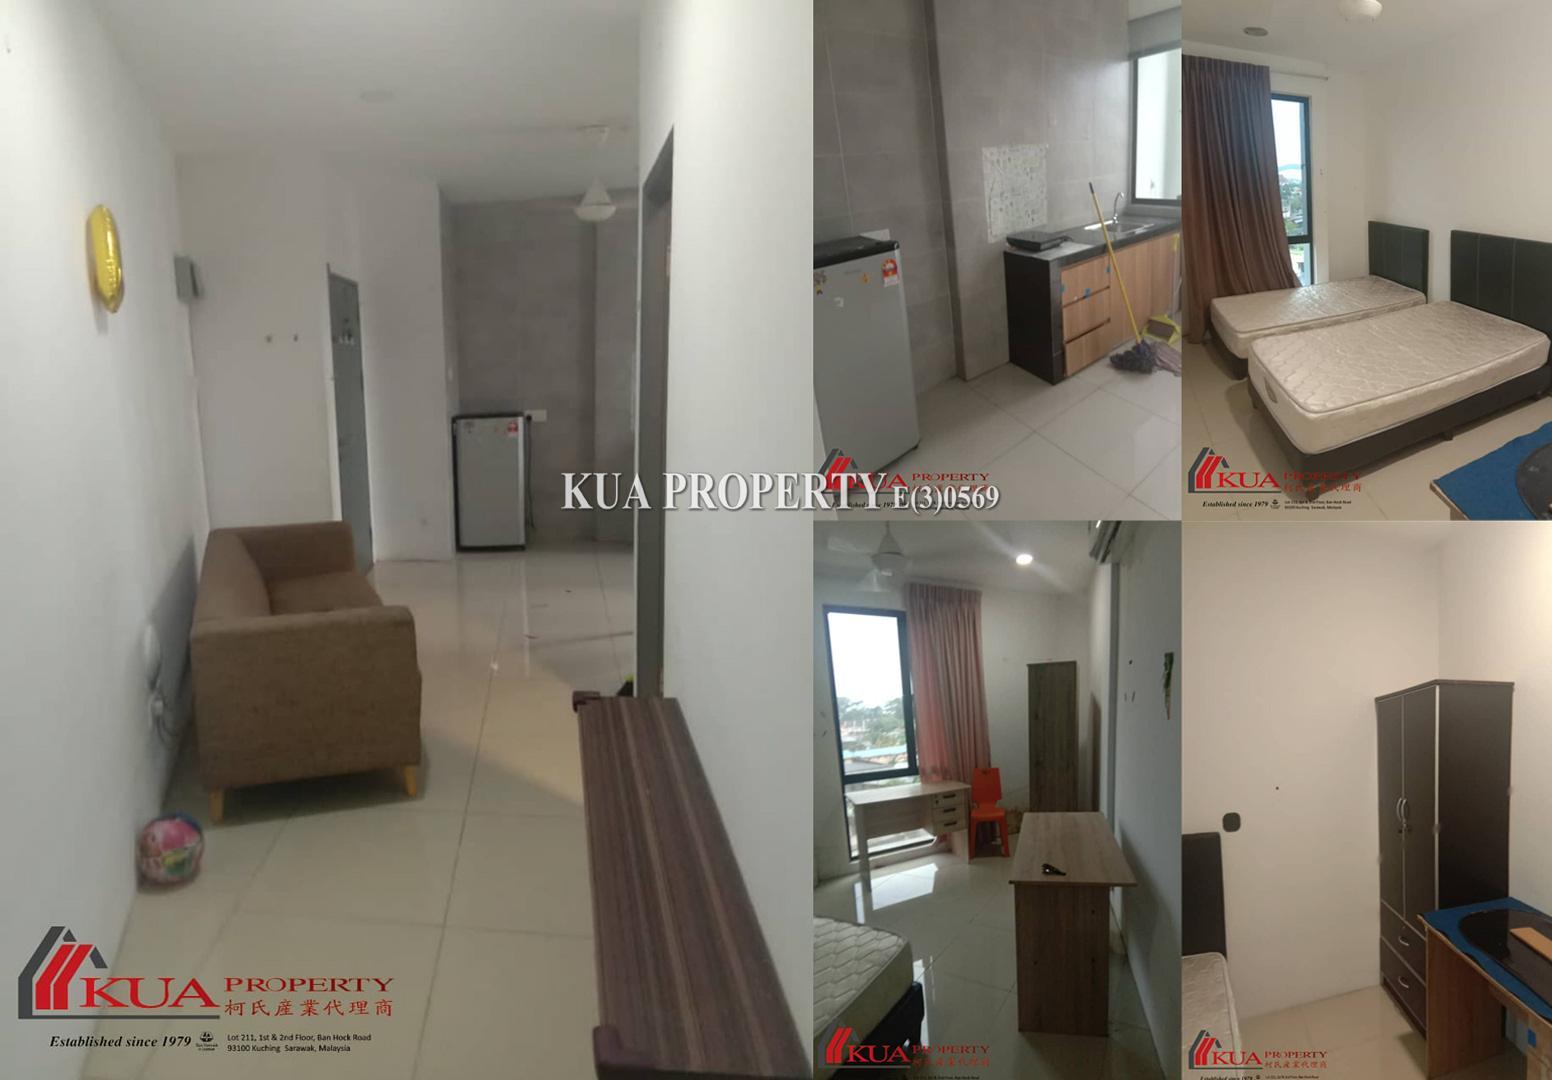 Queen’s Residence Apartment For Rent! at Jalan Tabuan Dayak